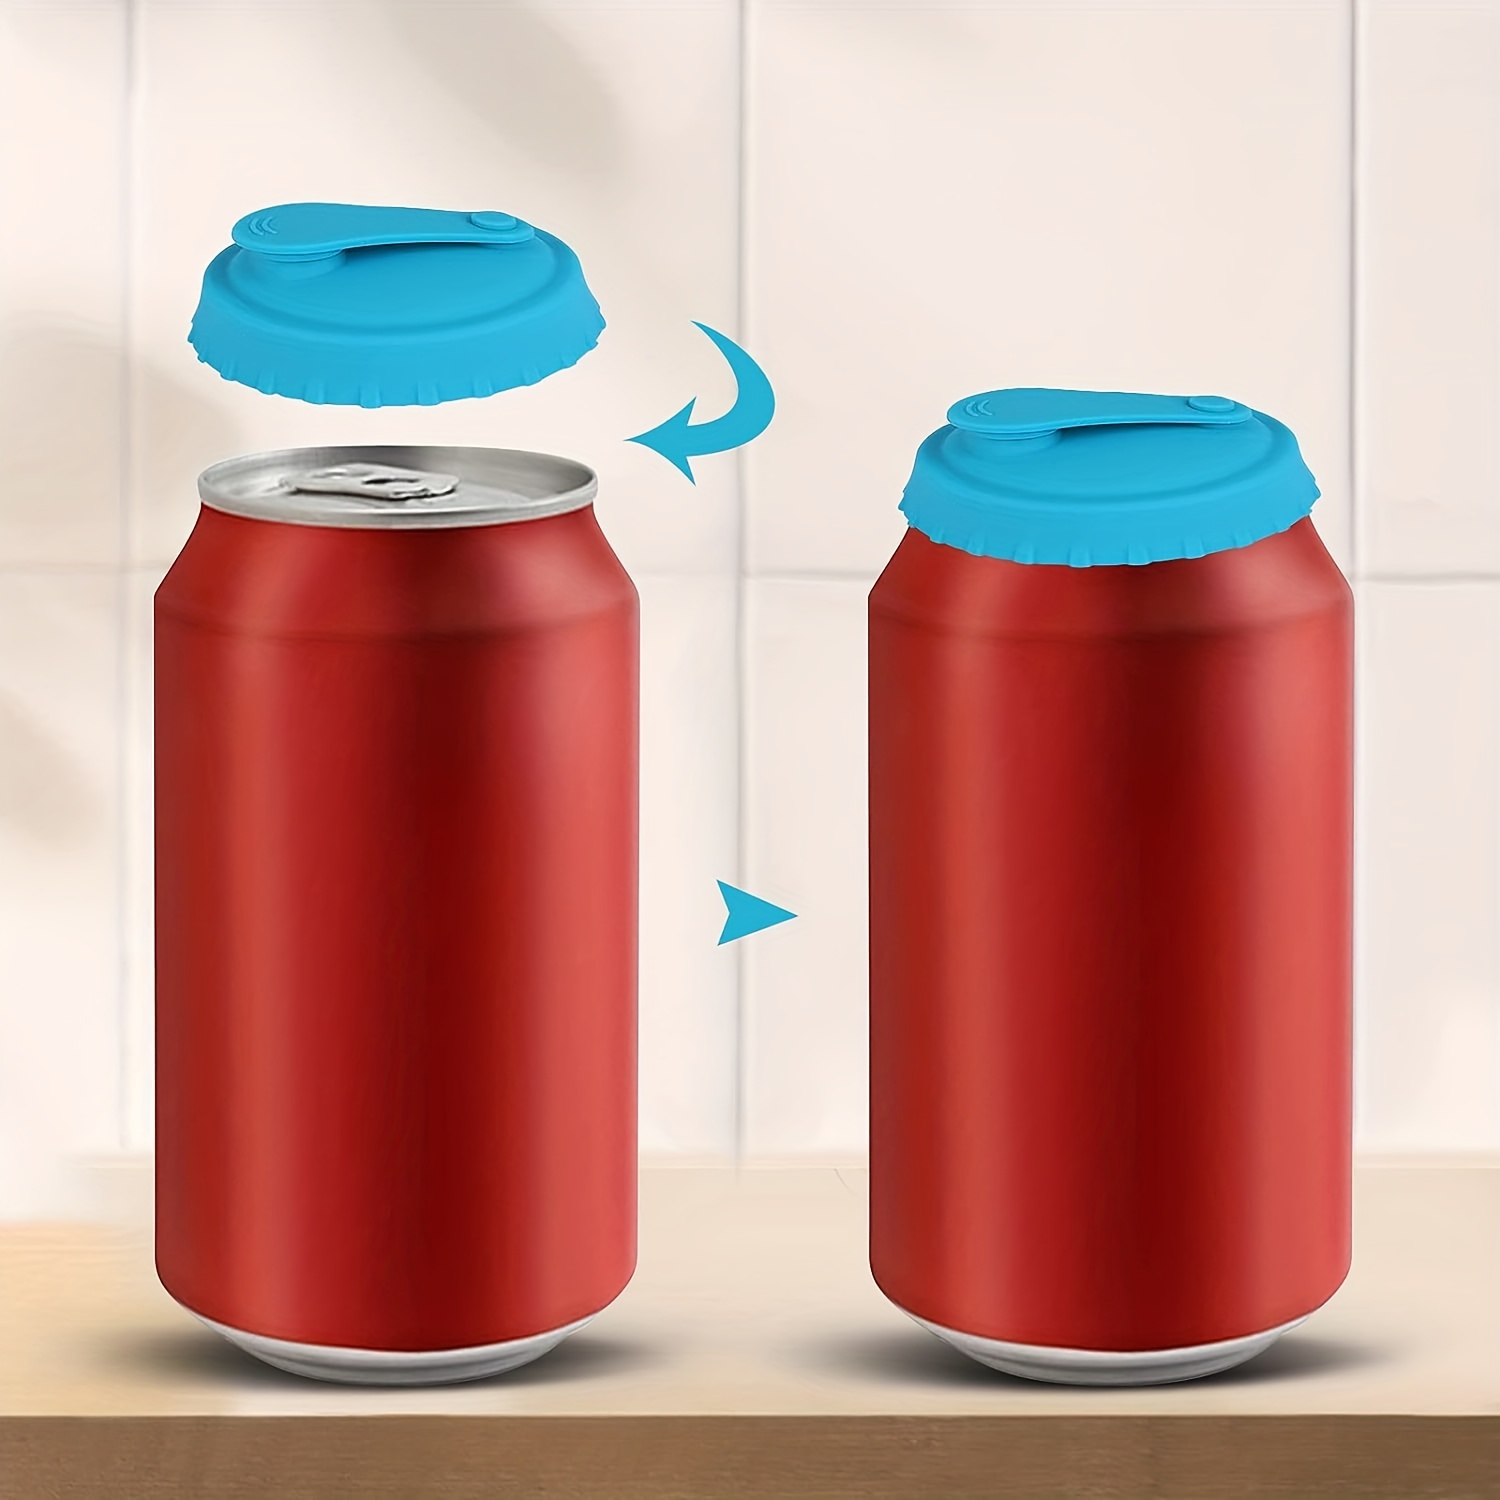 Silicone Soda Can Lid - FLAY112 - IdeaStage Promotional Products